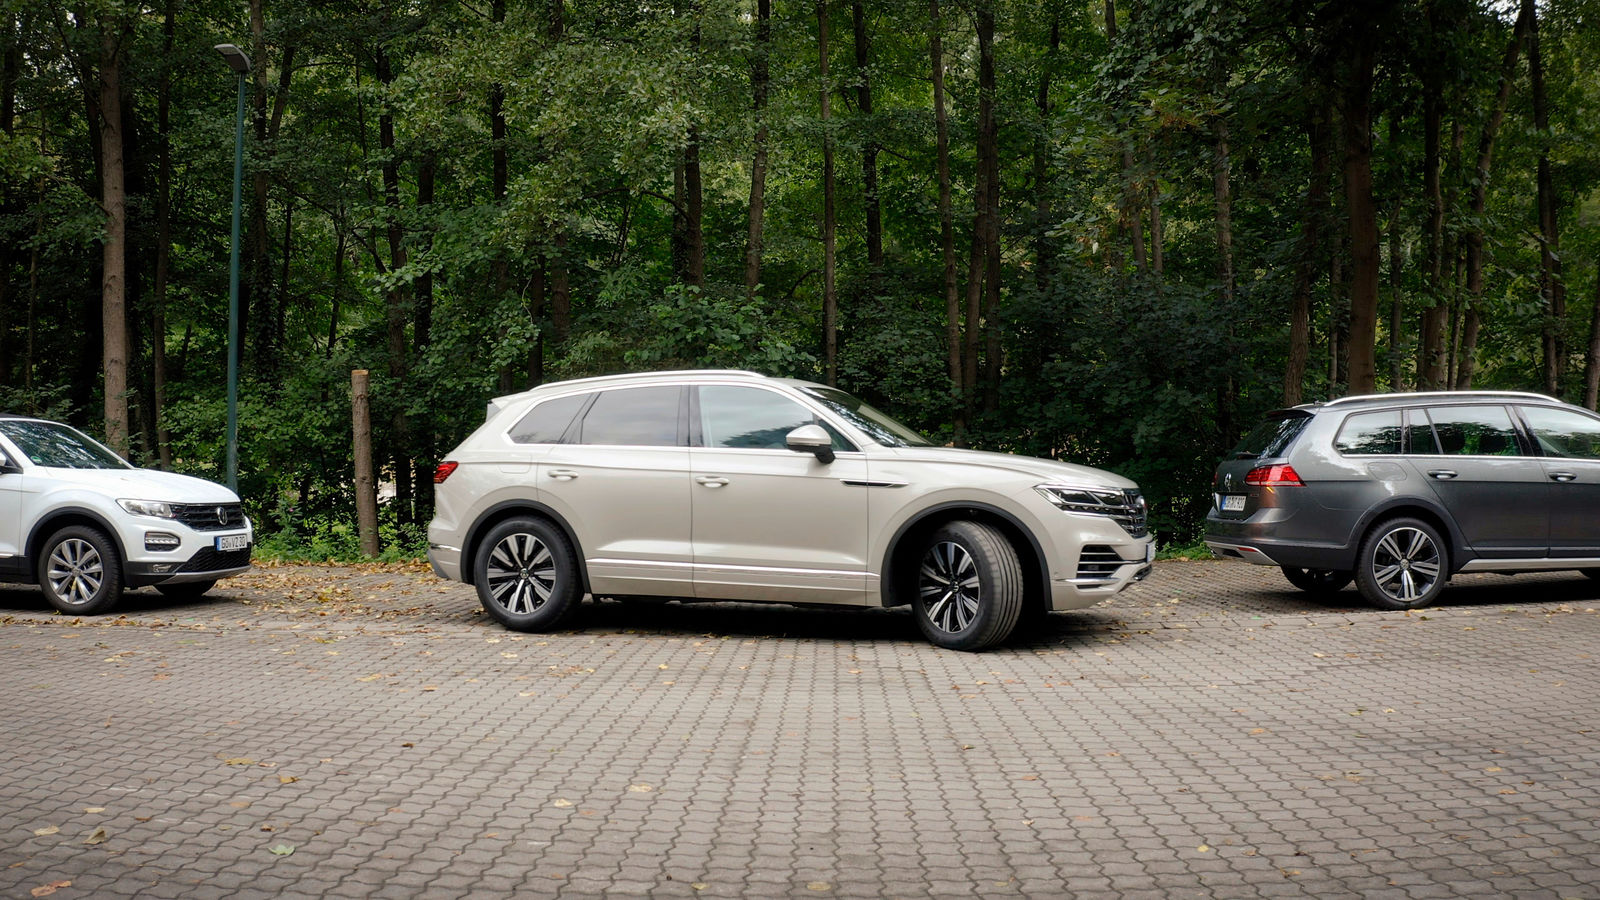 Car and smartphone merge into one: Touareg now parks by remote control